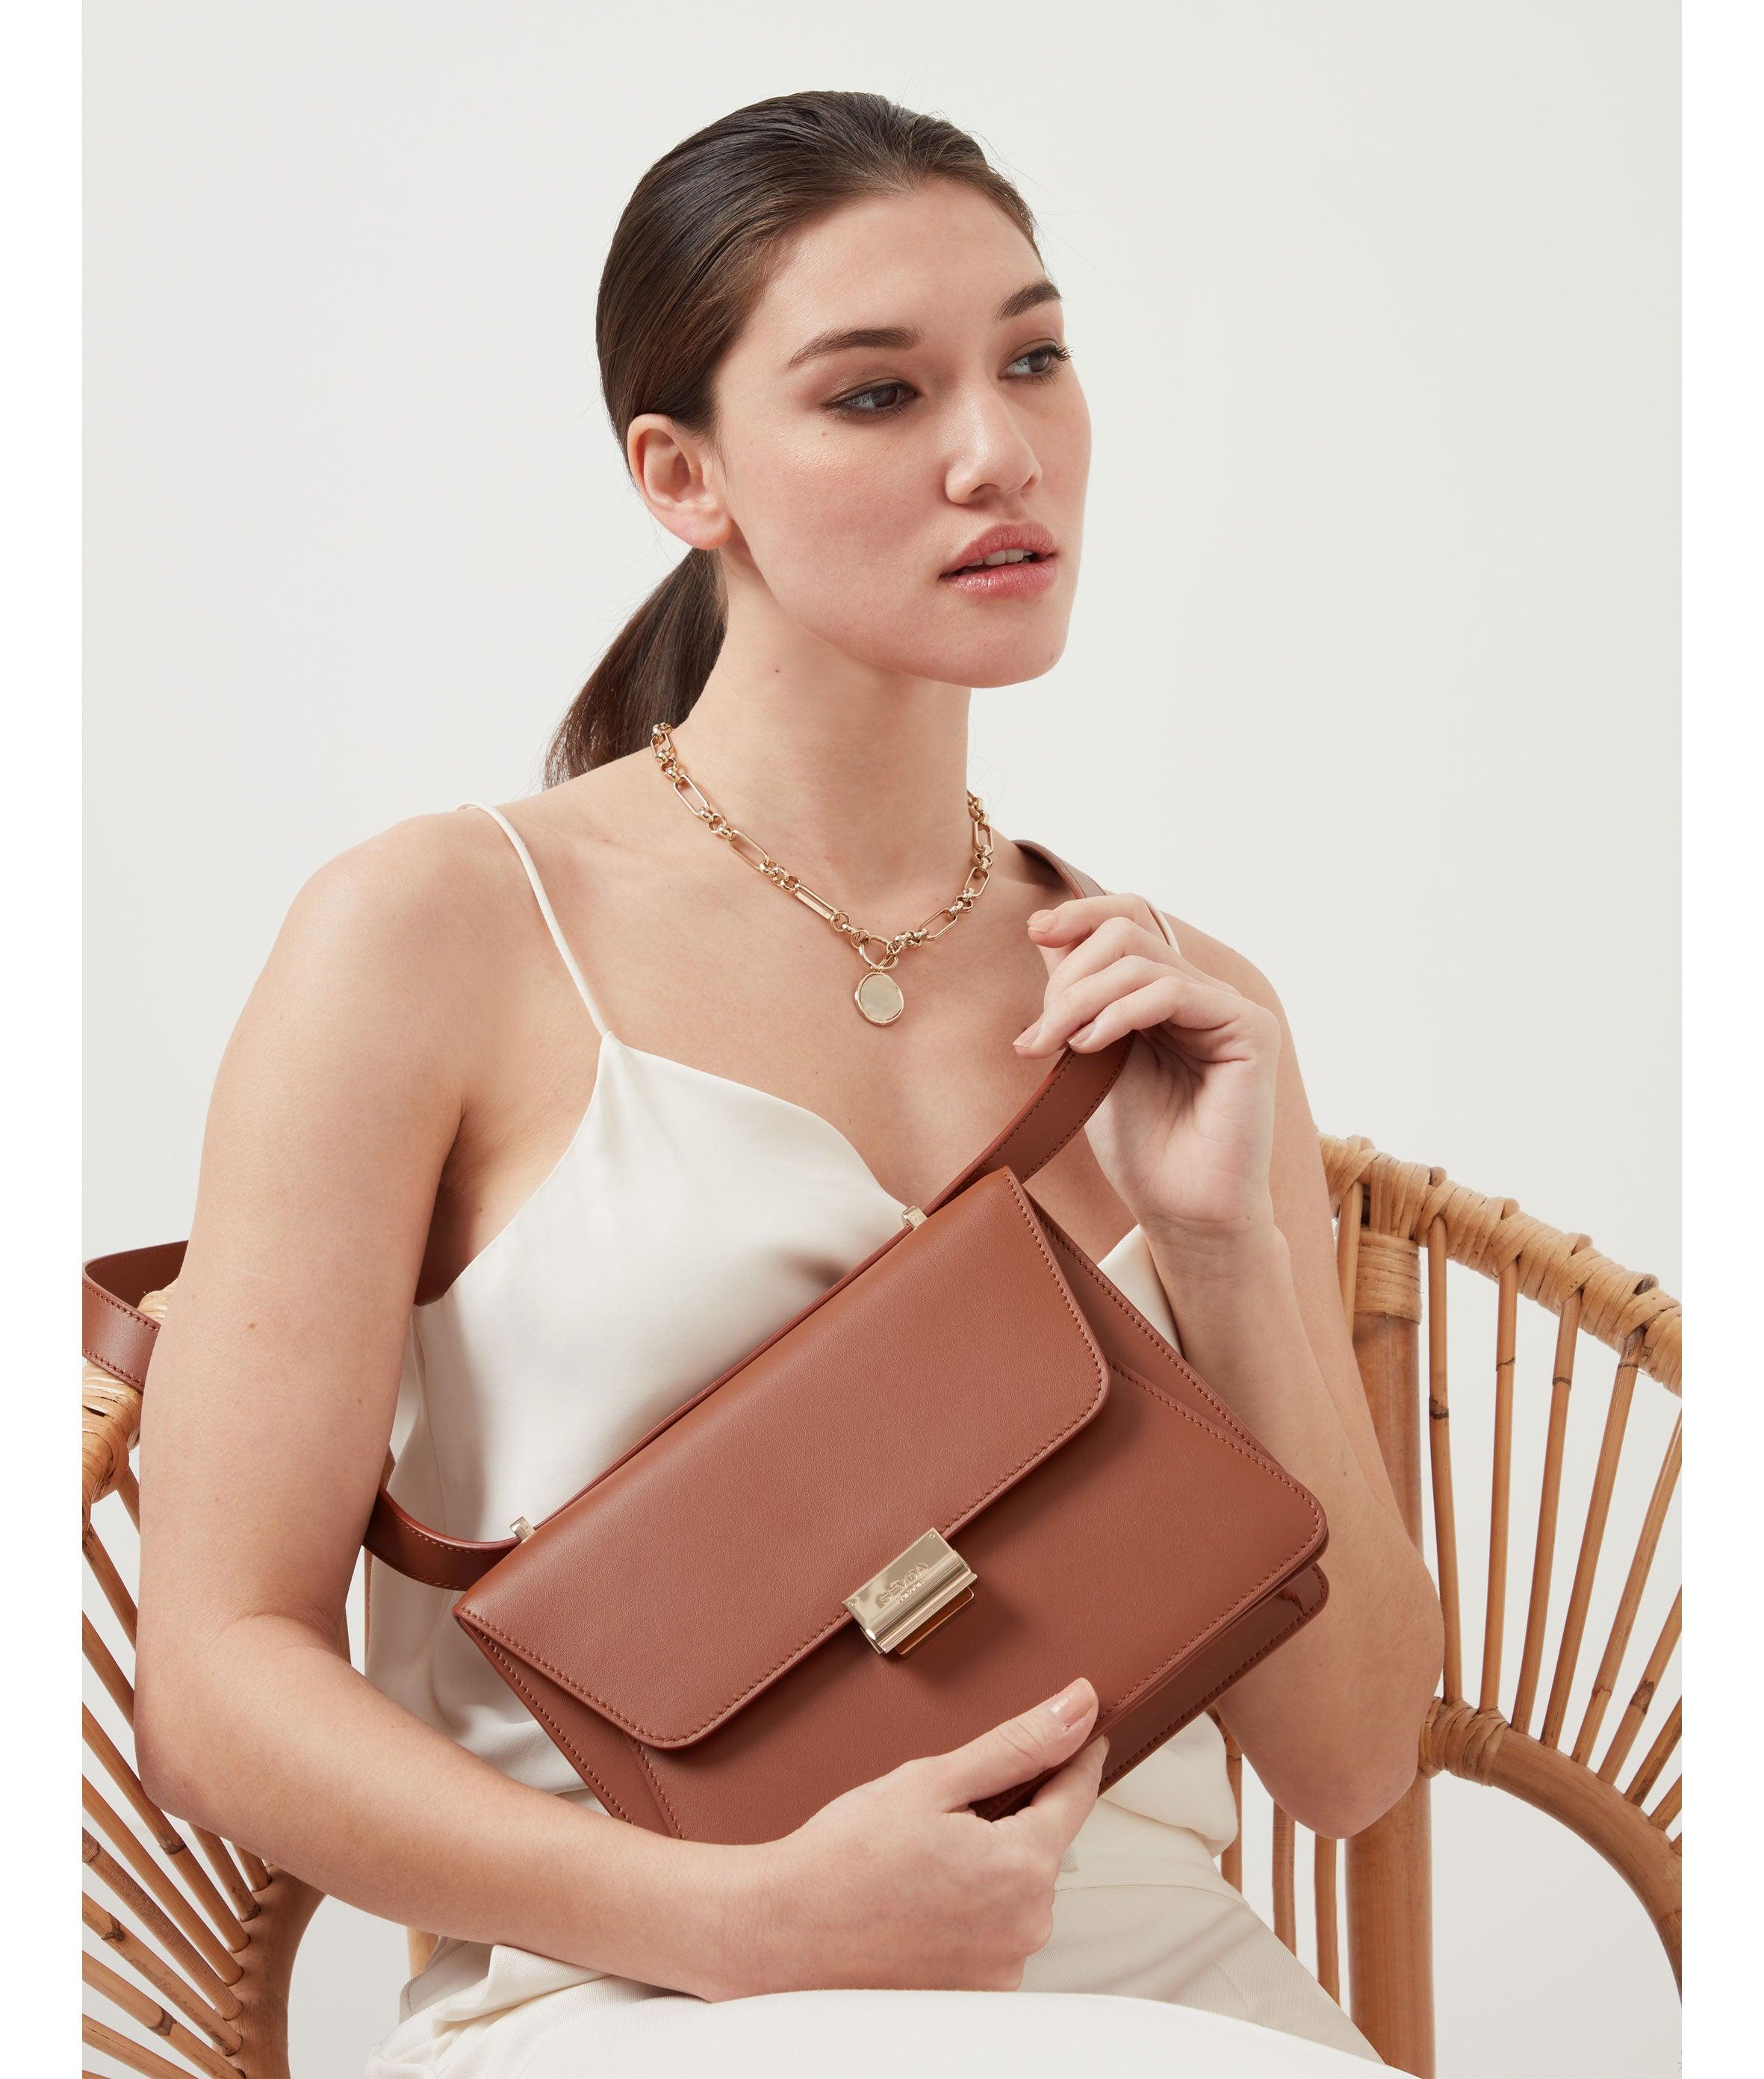 Tan Leather Designer Shoulder Bag - A fusion of London's style and Italian craftsmanship.